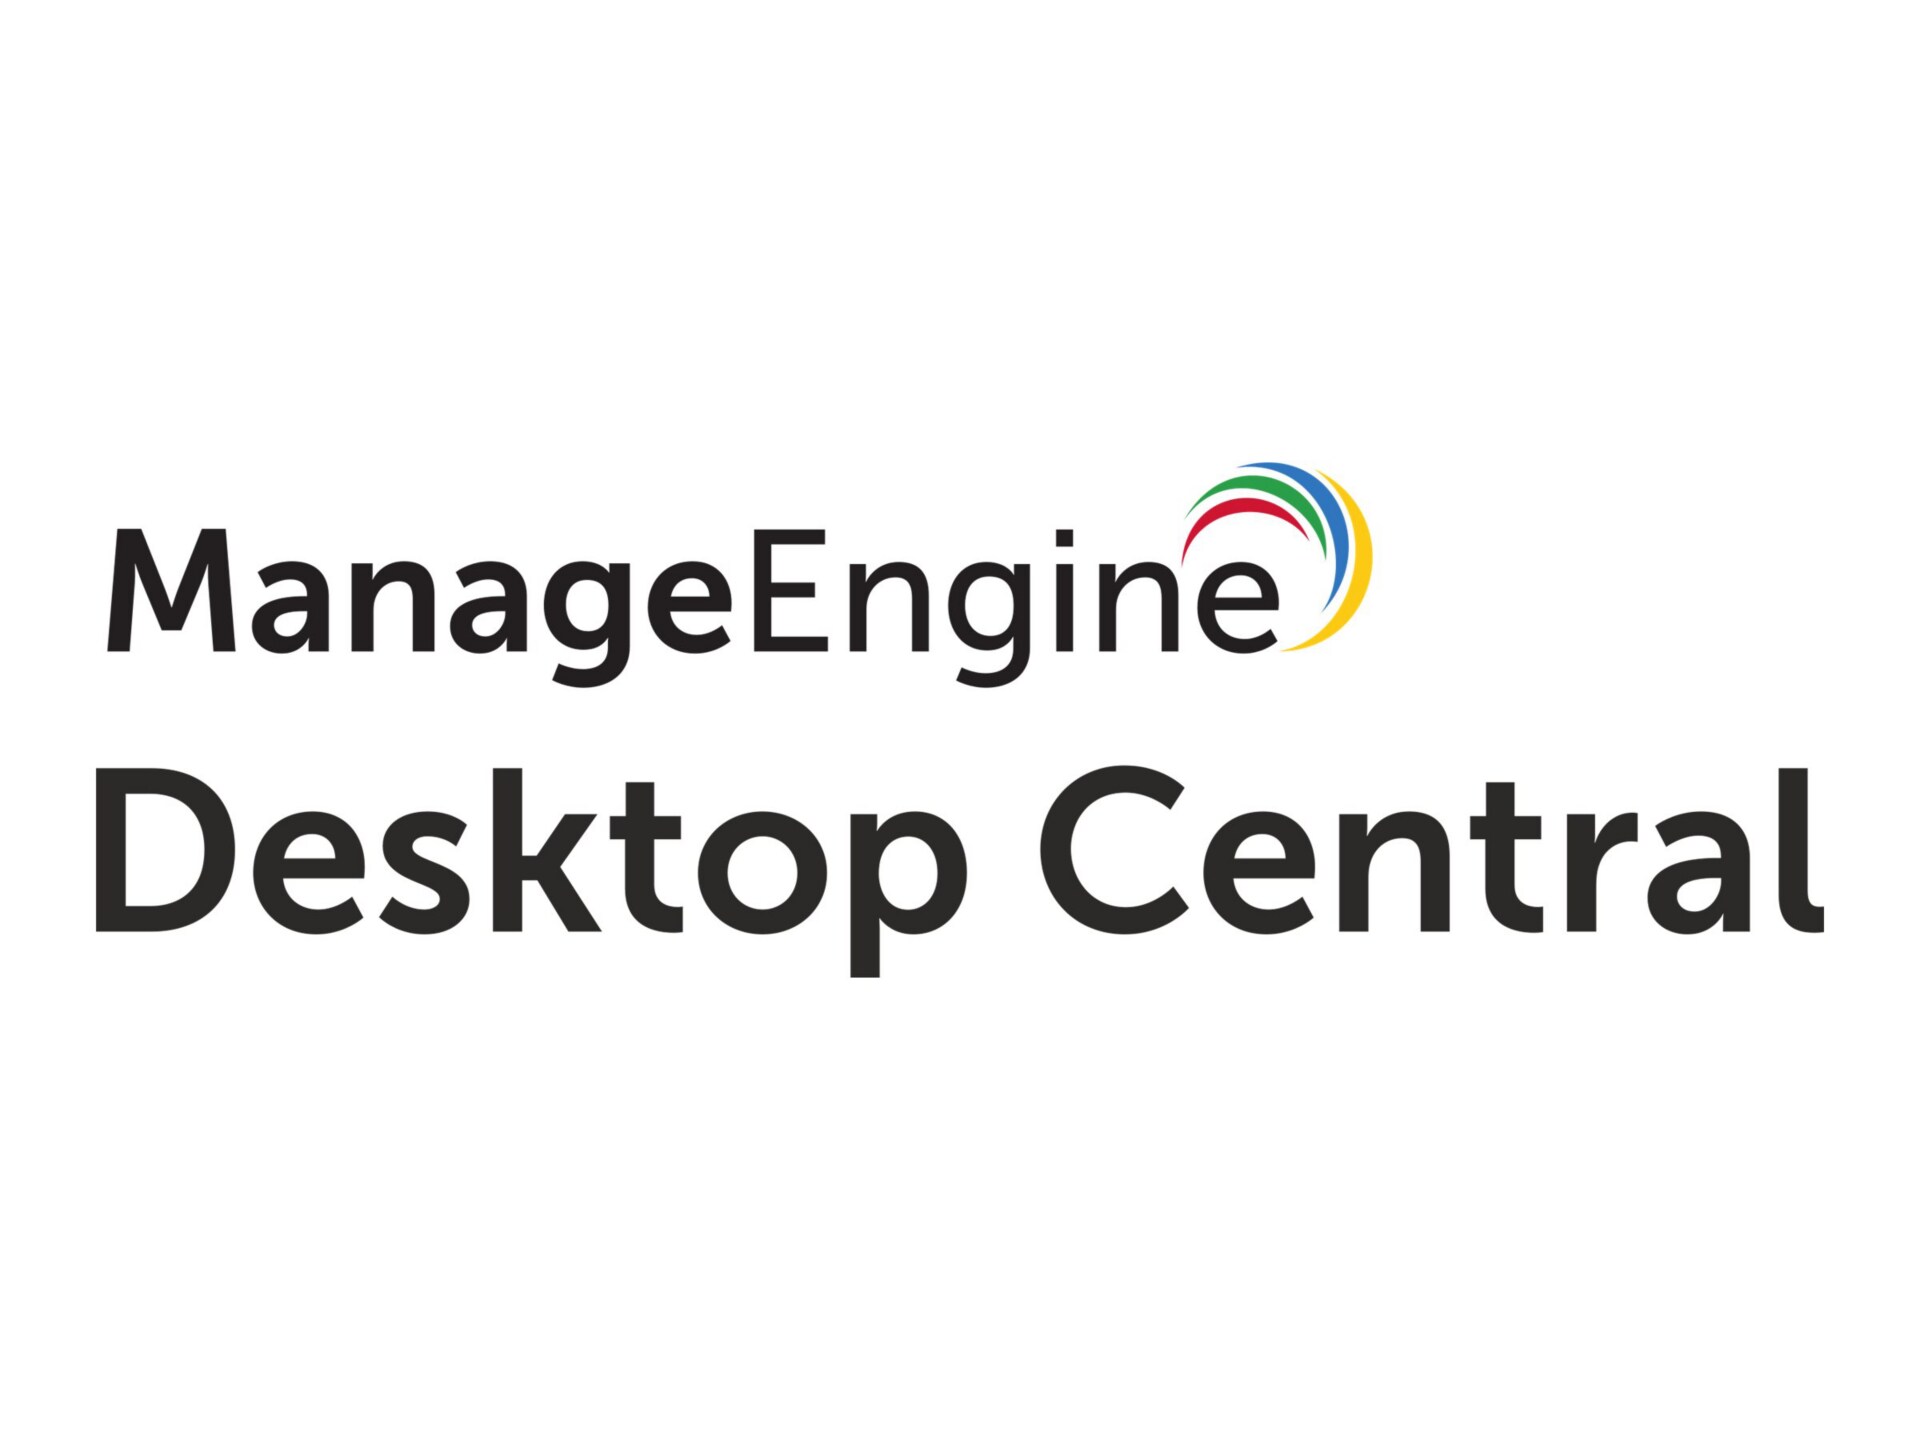 Desktop Central Distributed Edition - subscription license (1 year) - 1 user, 50 computers